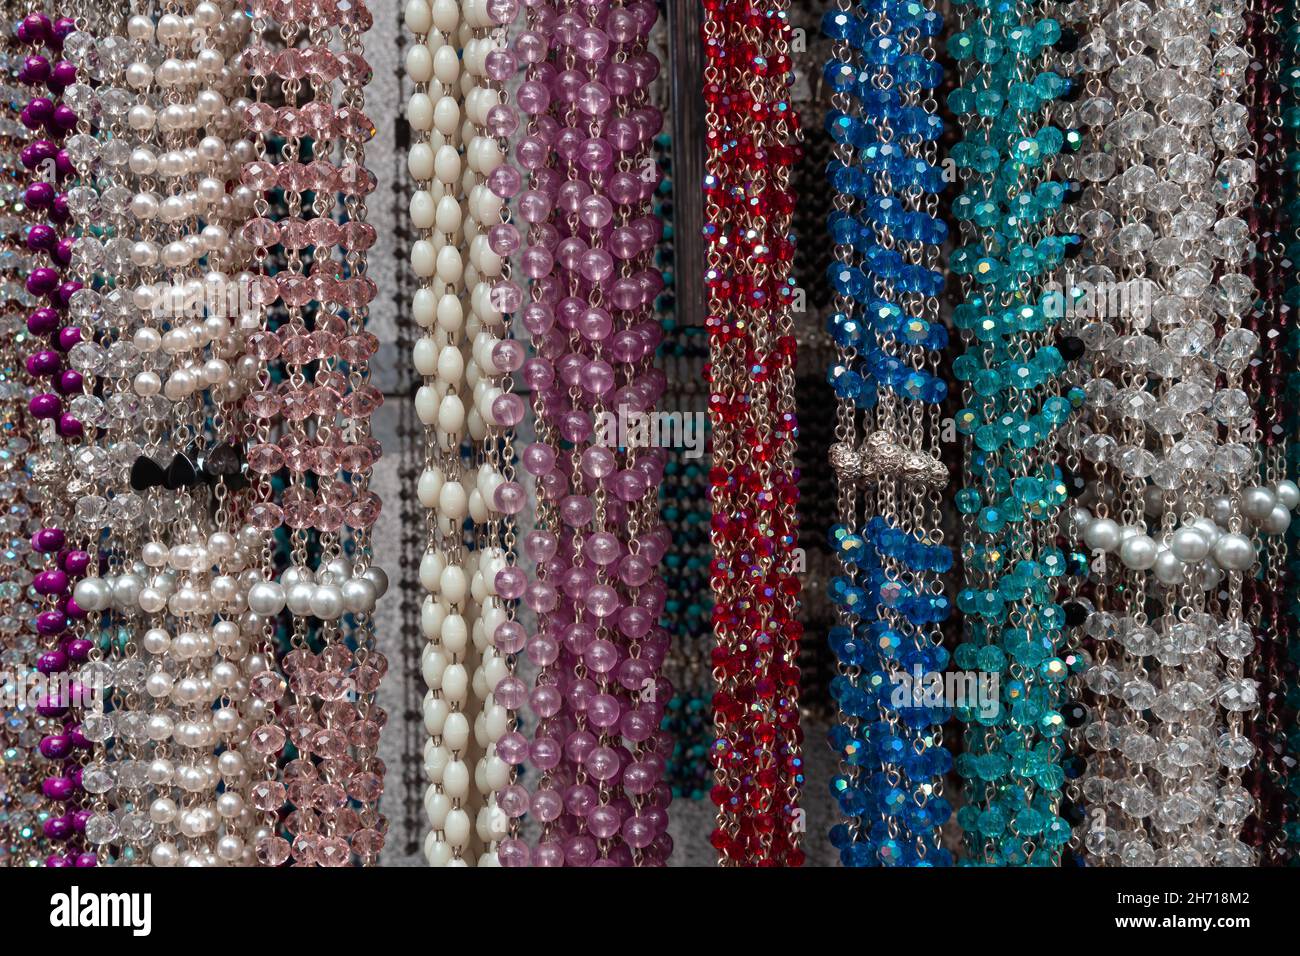 Colorful rosaries in a souvenir and devotional shop in Lourdes, France Stock Photo